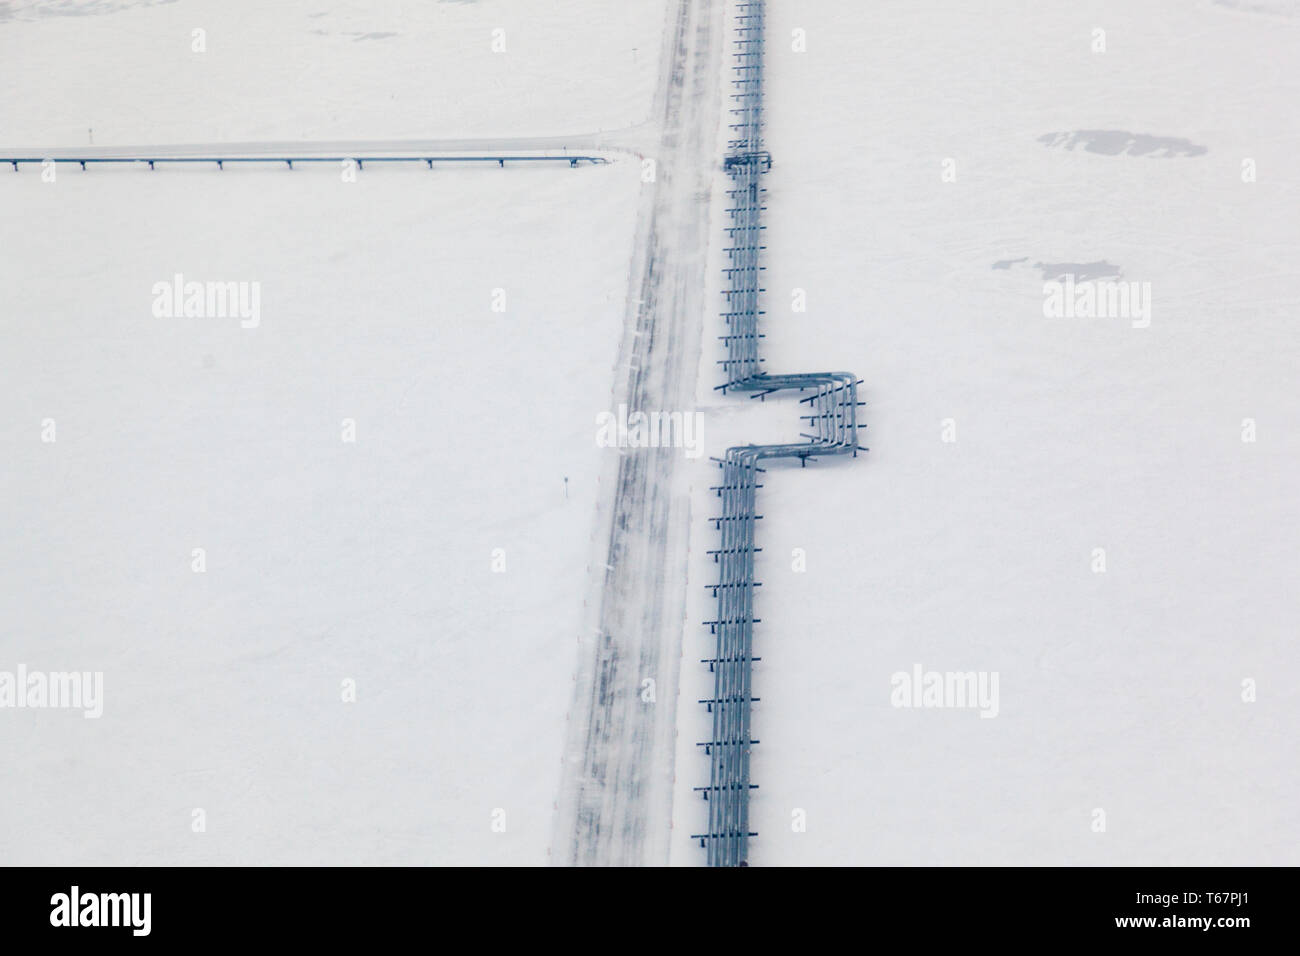 Oil pipeline and iceroad leading from the ConocoPhillips oilwells in Alpine, connecting to the Pump station 1 on the Alyeska Pipeline in Prudhoe Bay, the northern start of the Trans-Alaska Pipeline System. Stock Photo